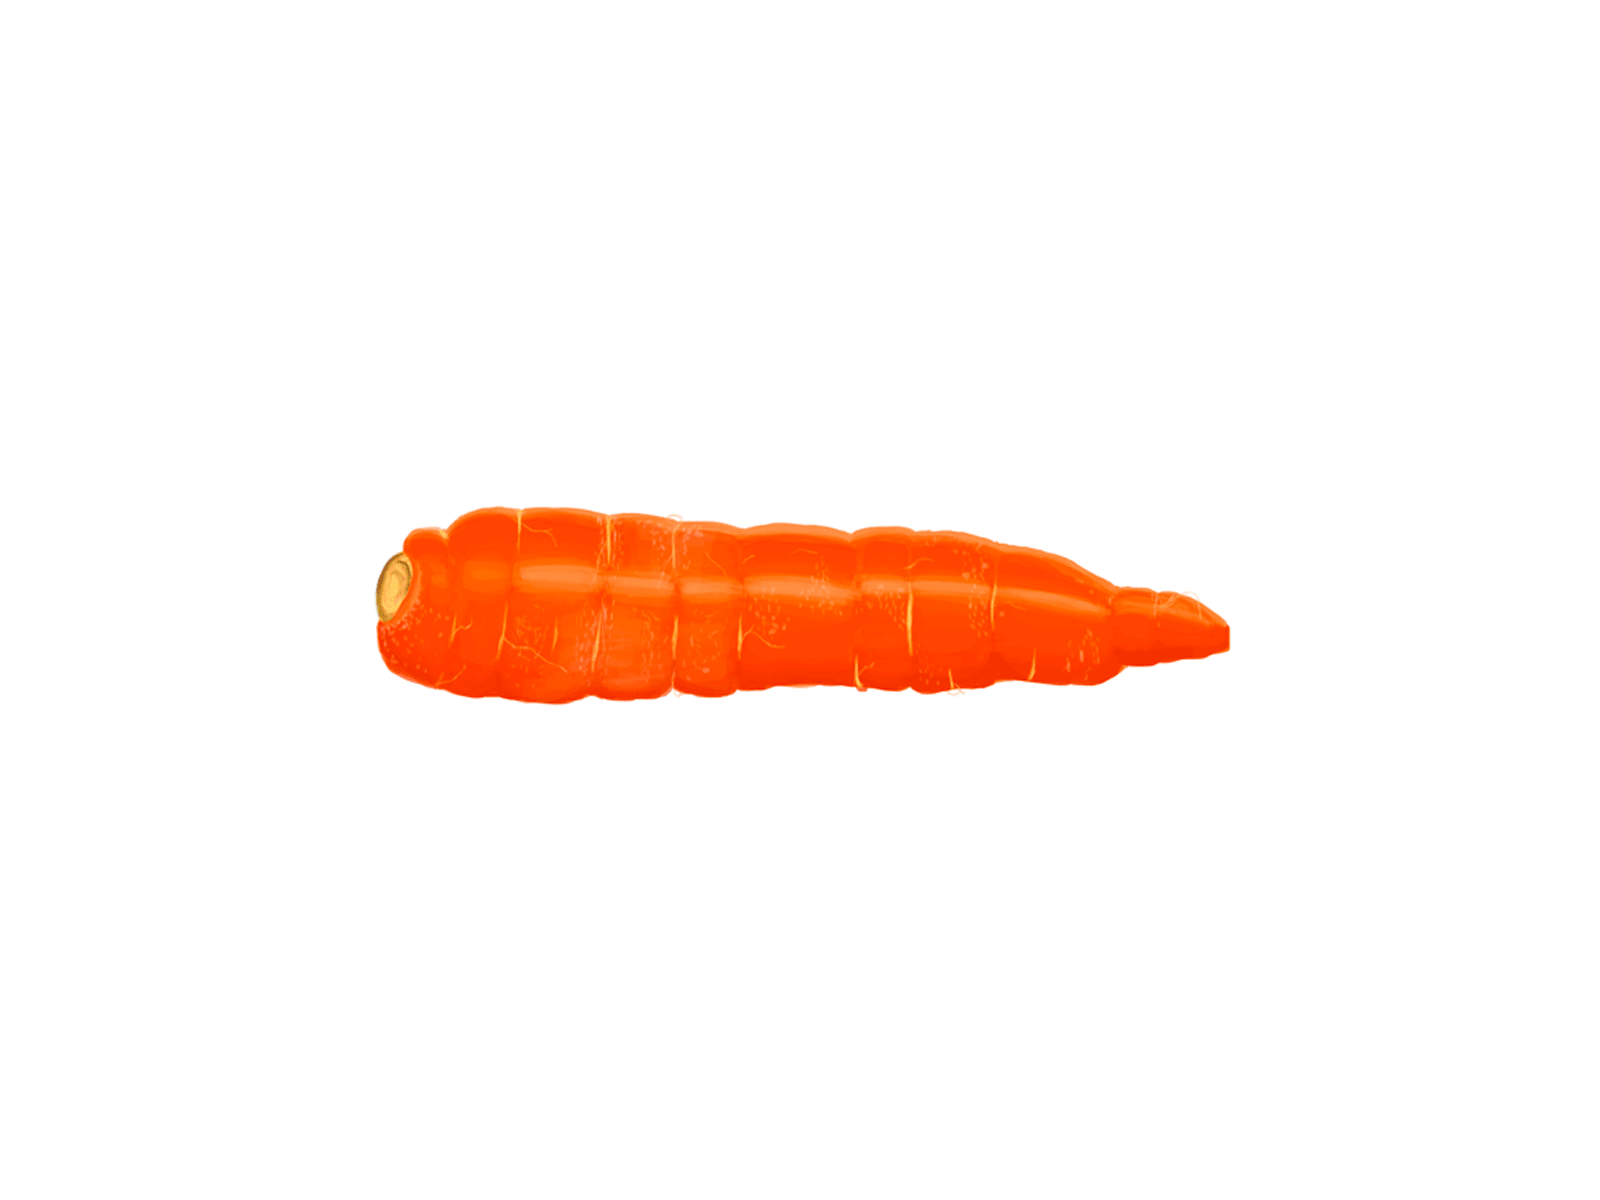 Eaten carrot animated gif animation bunny carrot eating food gif illustration pattern photoshop roots texture vegetables veggie